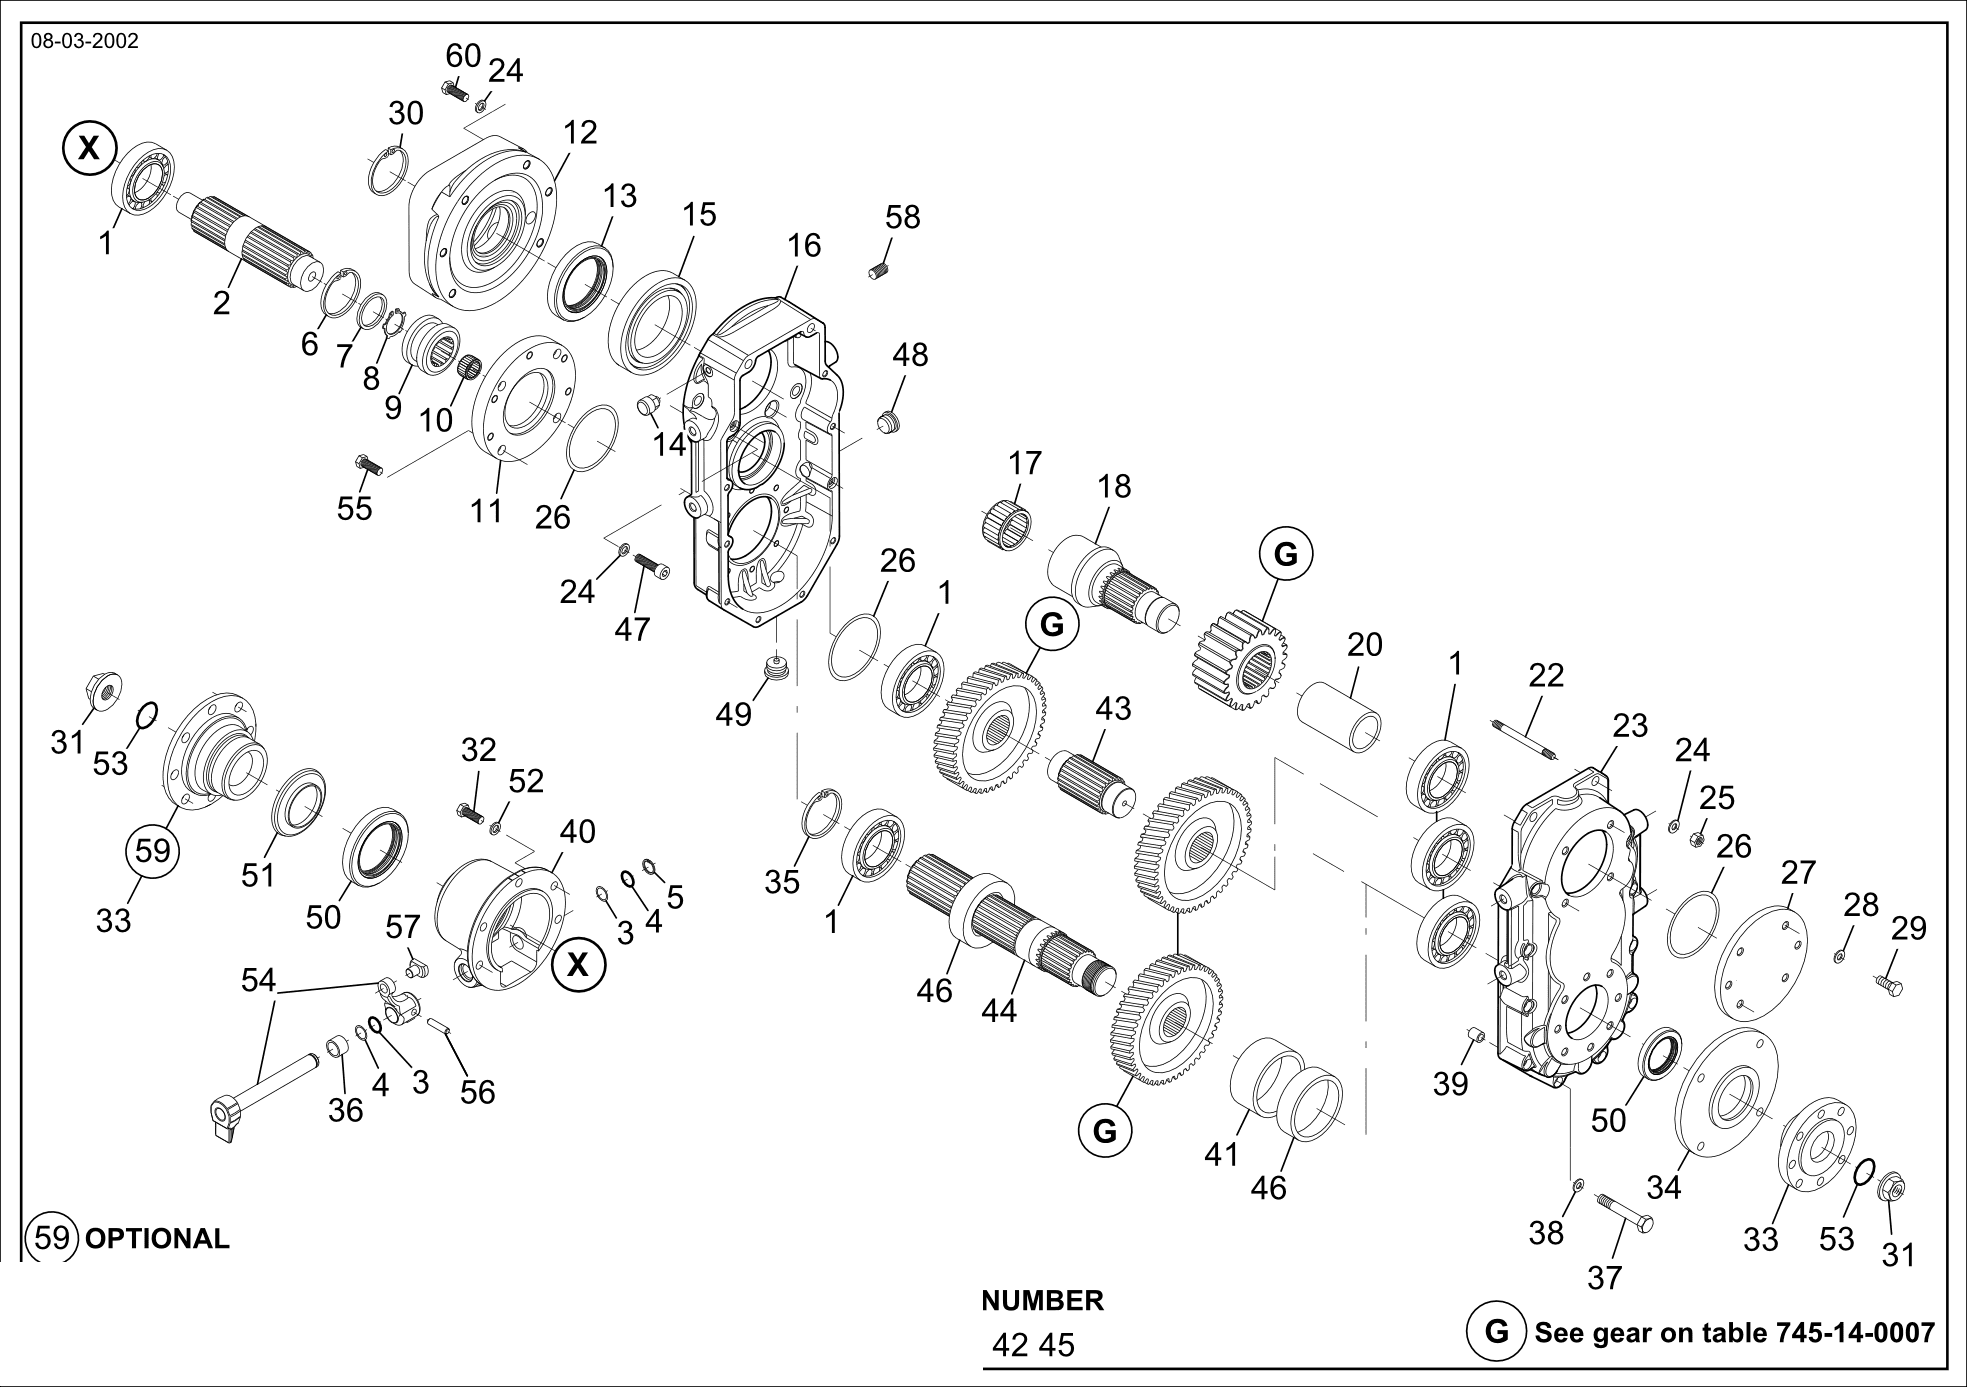 drawing for NOBLE LIFT TRUCKS 7T589 - BUSSOLA (figure 2)